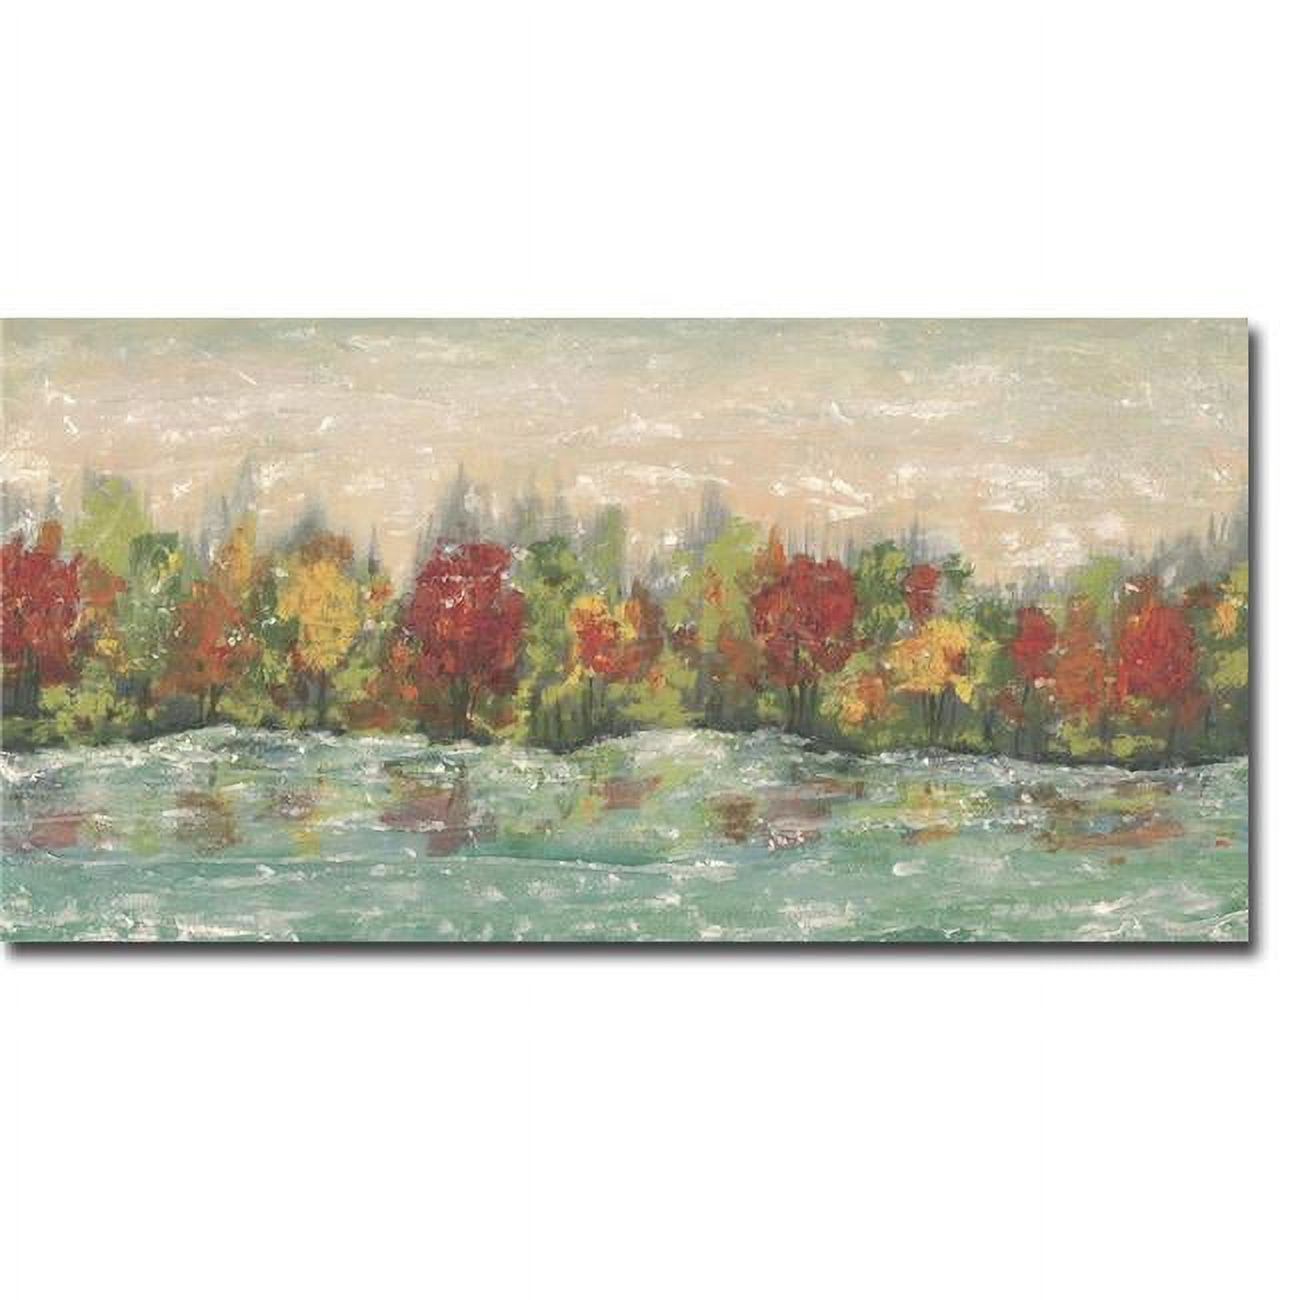 12242728g Impressions By Stephane Fontaine Premium Gallery-wrapped Canvas Giclee - Ready To Hang - Large, 12 X 24 X 1.5 In.